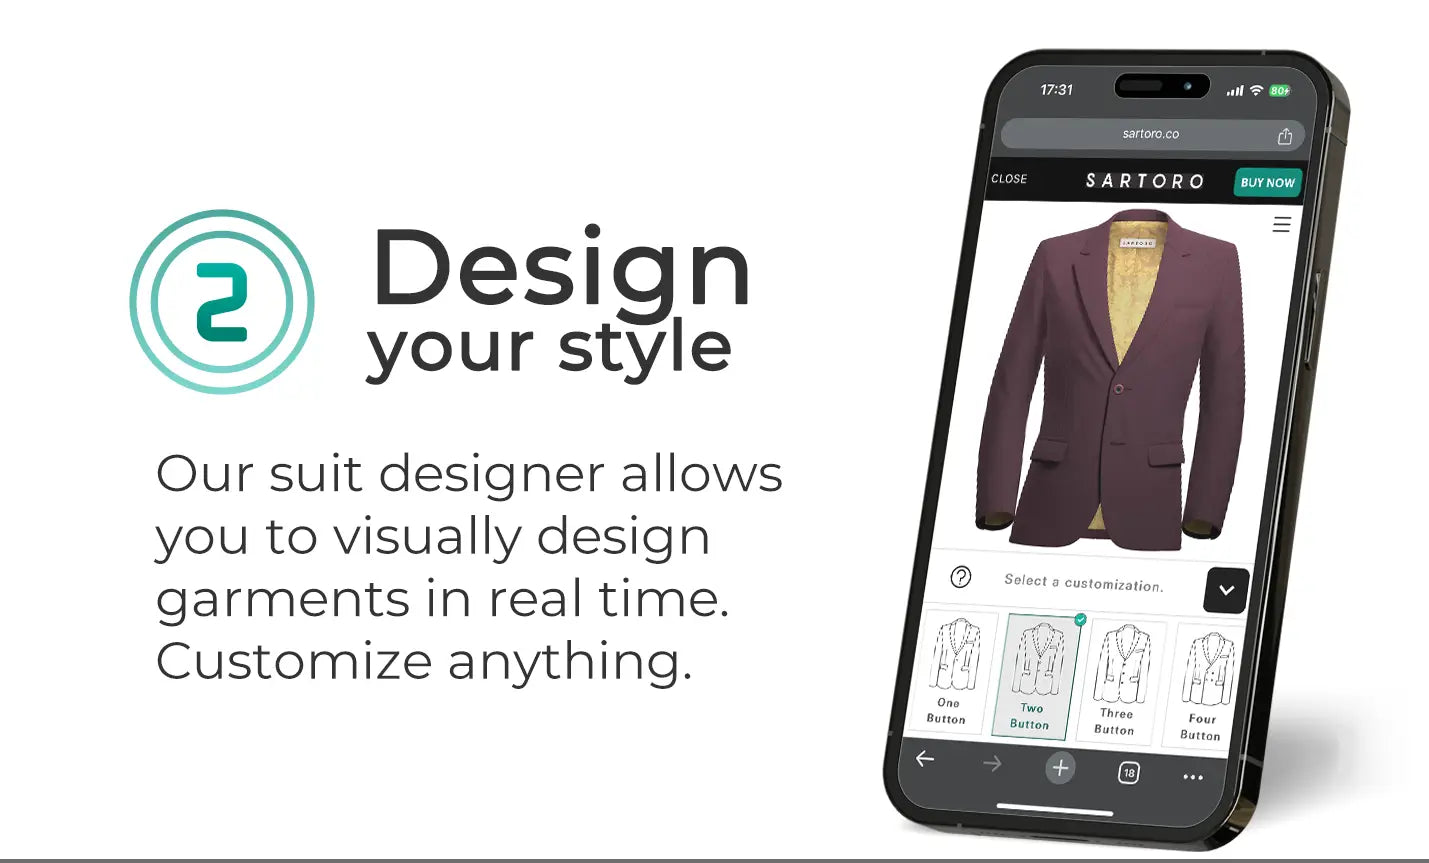 Design your style with our suit designer, designing the garments in real time.